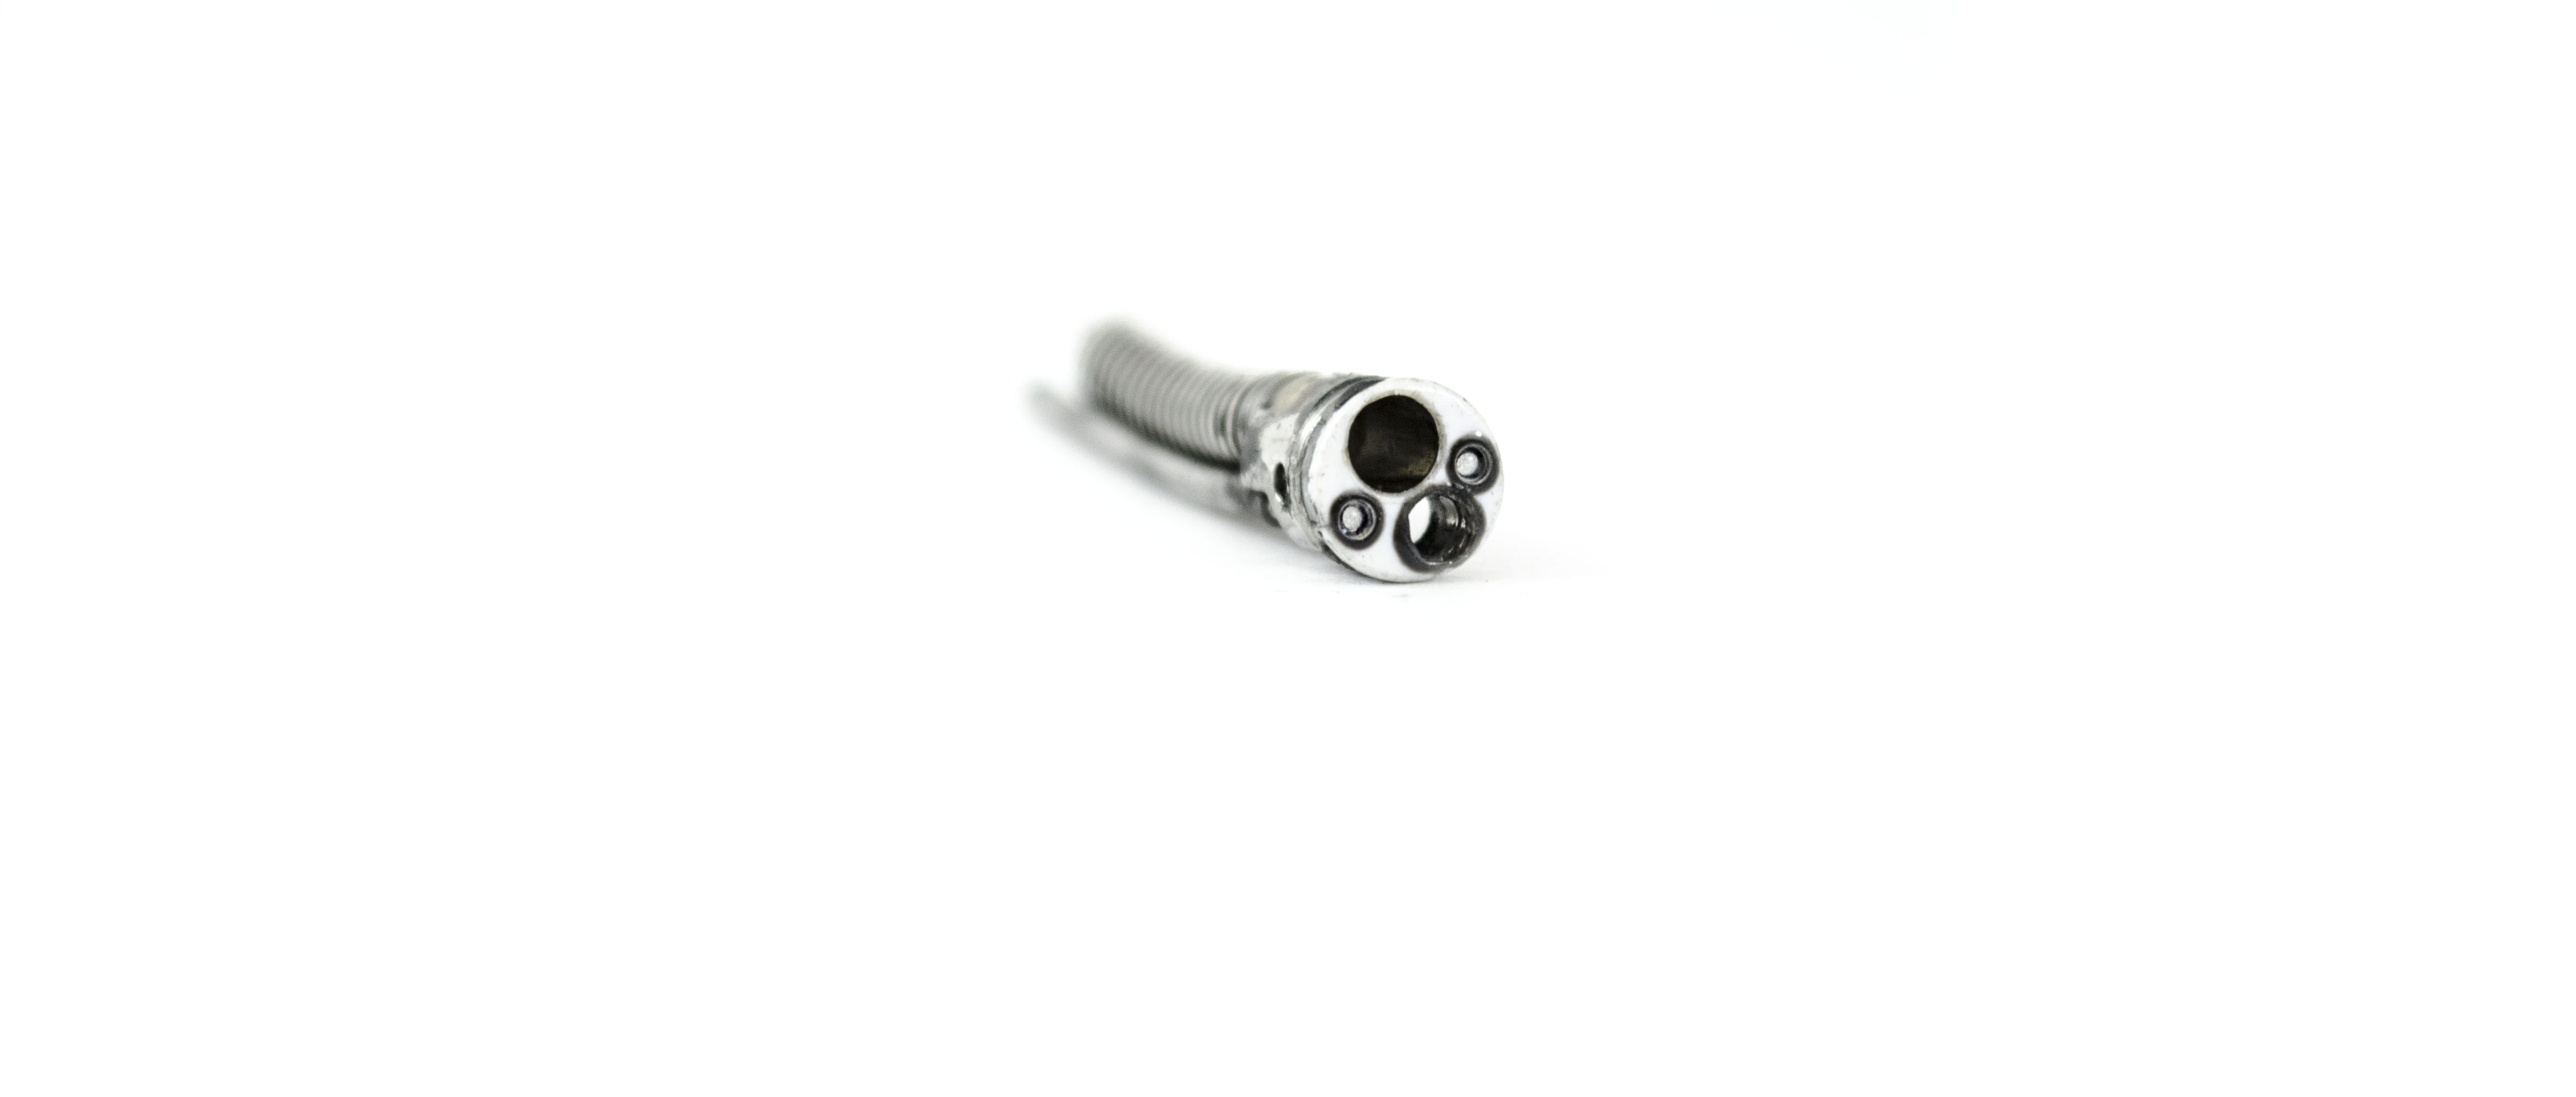 OEM Distal Tip with Lenses and C-Cover - BF-1T160